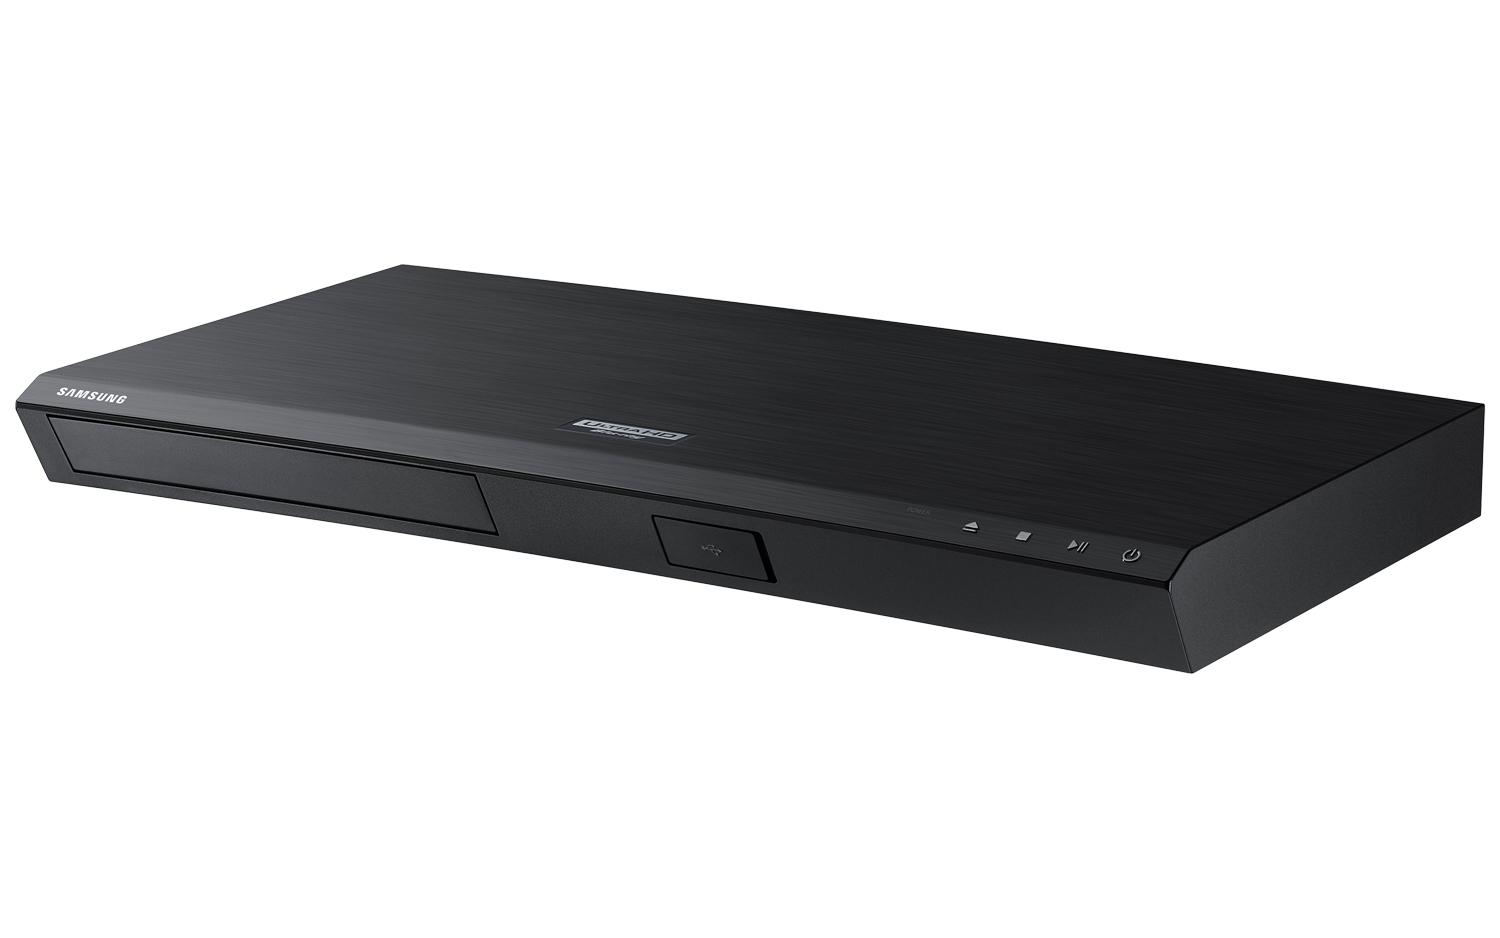 Samsung Gives Up On Blu-Ray Player Dream — Stops Production in U.S.